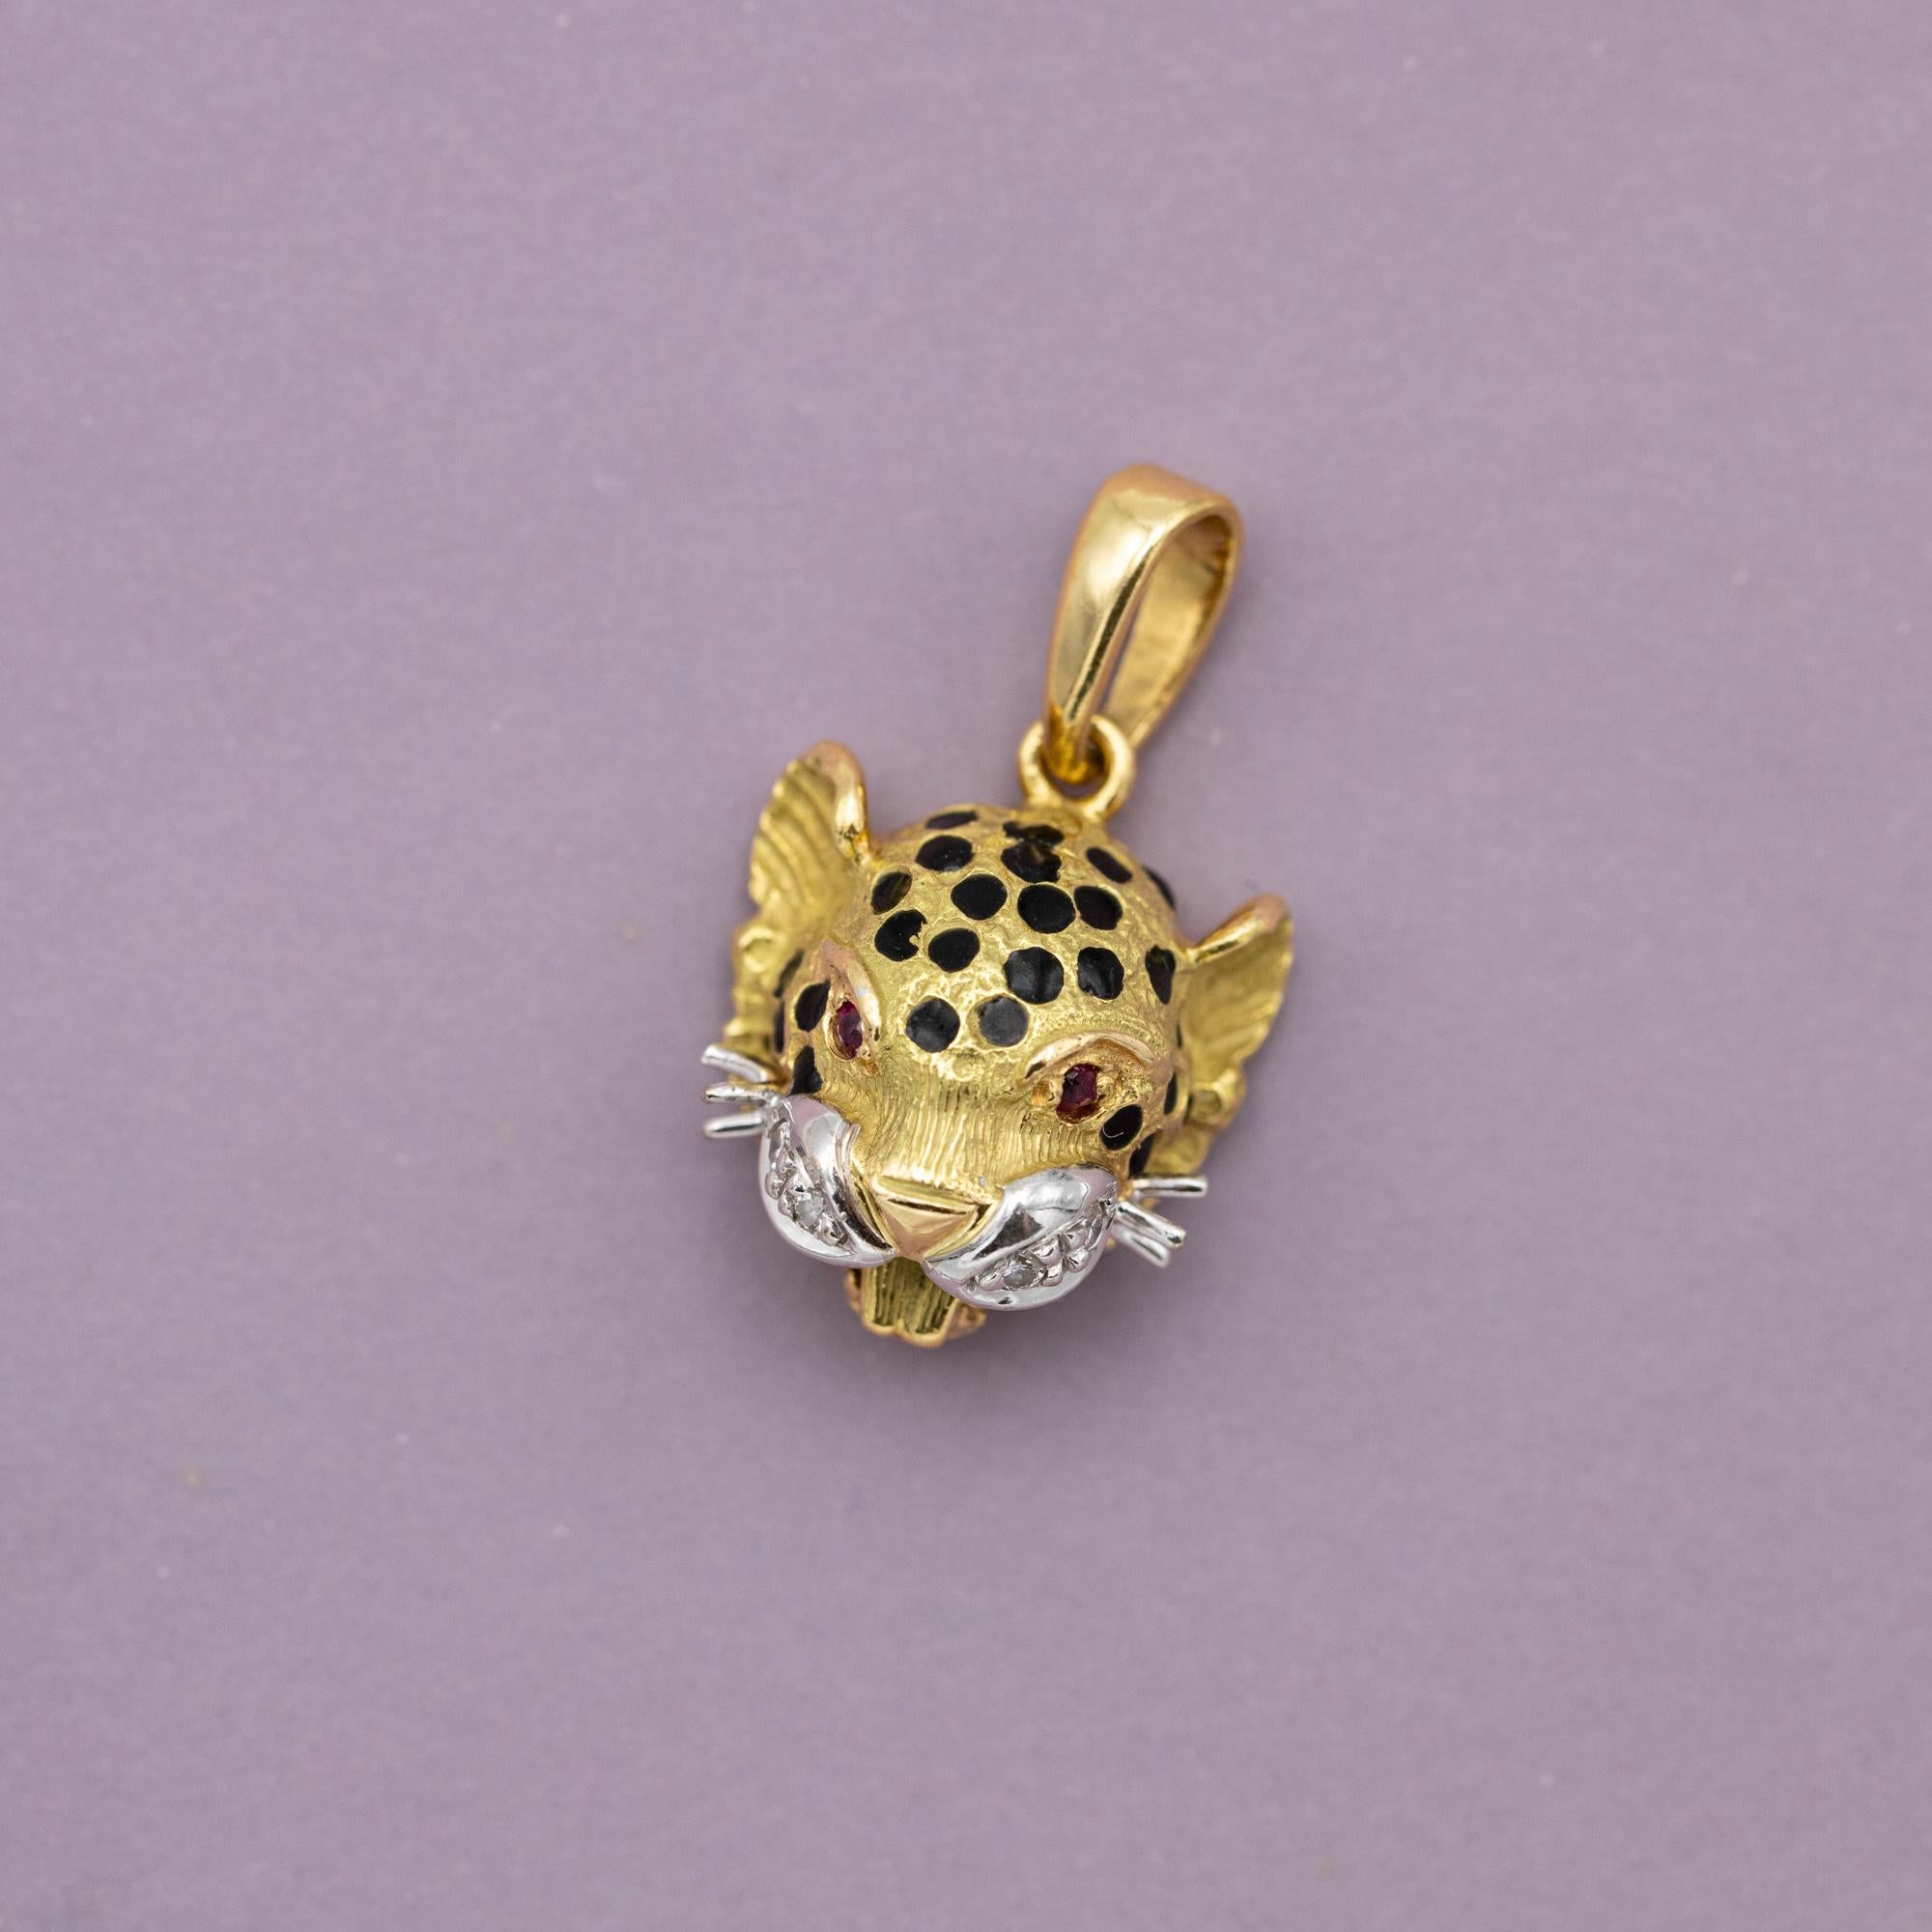 Modern 18k solid gold panther pendant - Vintage tiger charm - statement cat jewellery For Sale